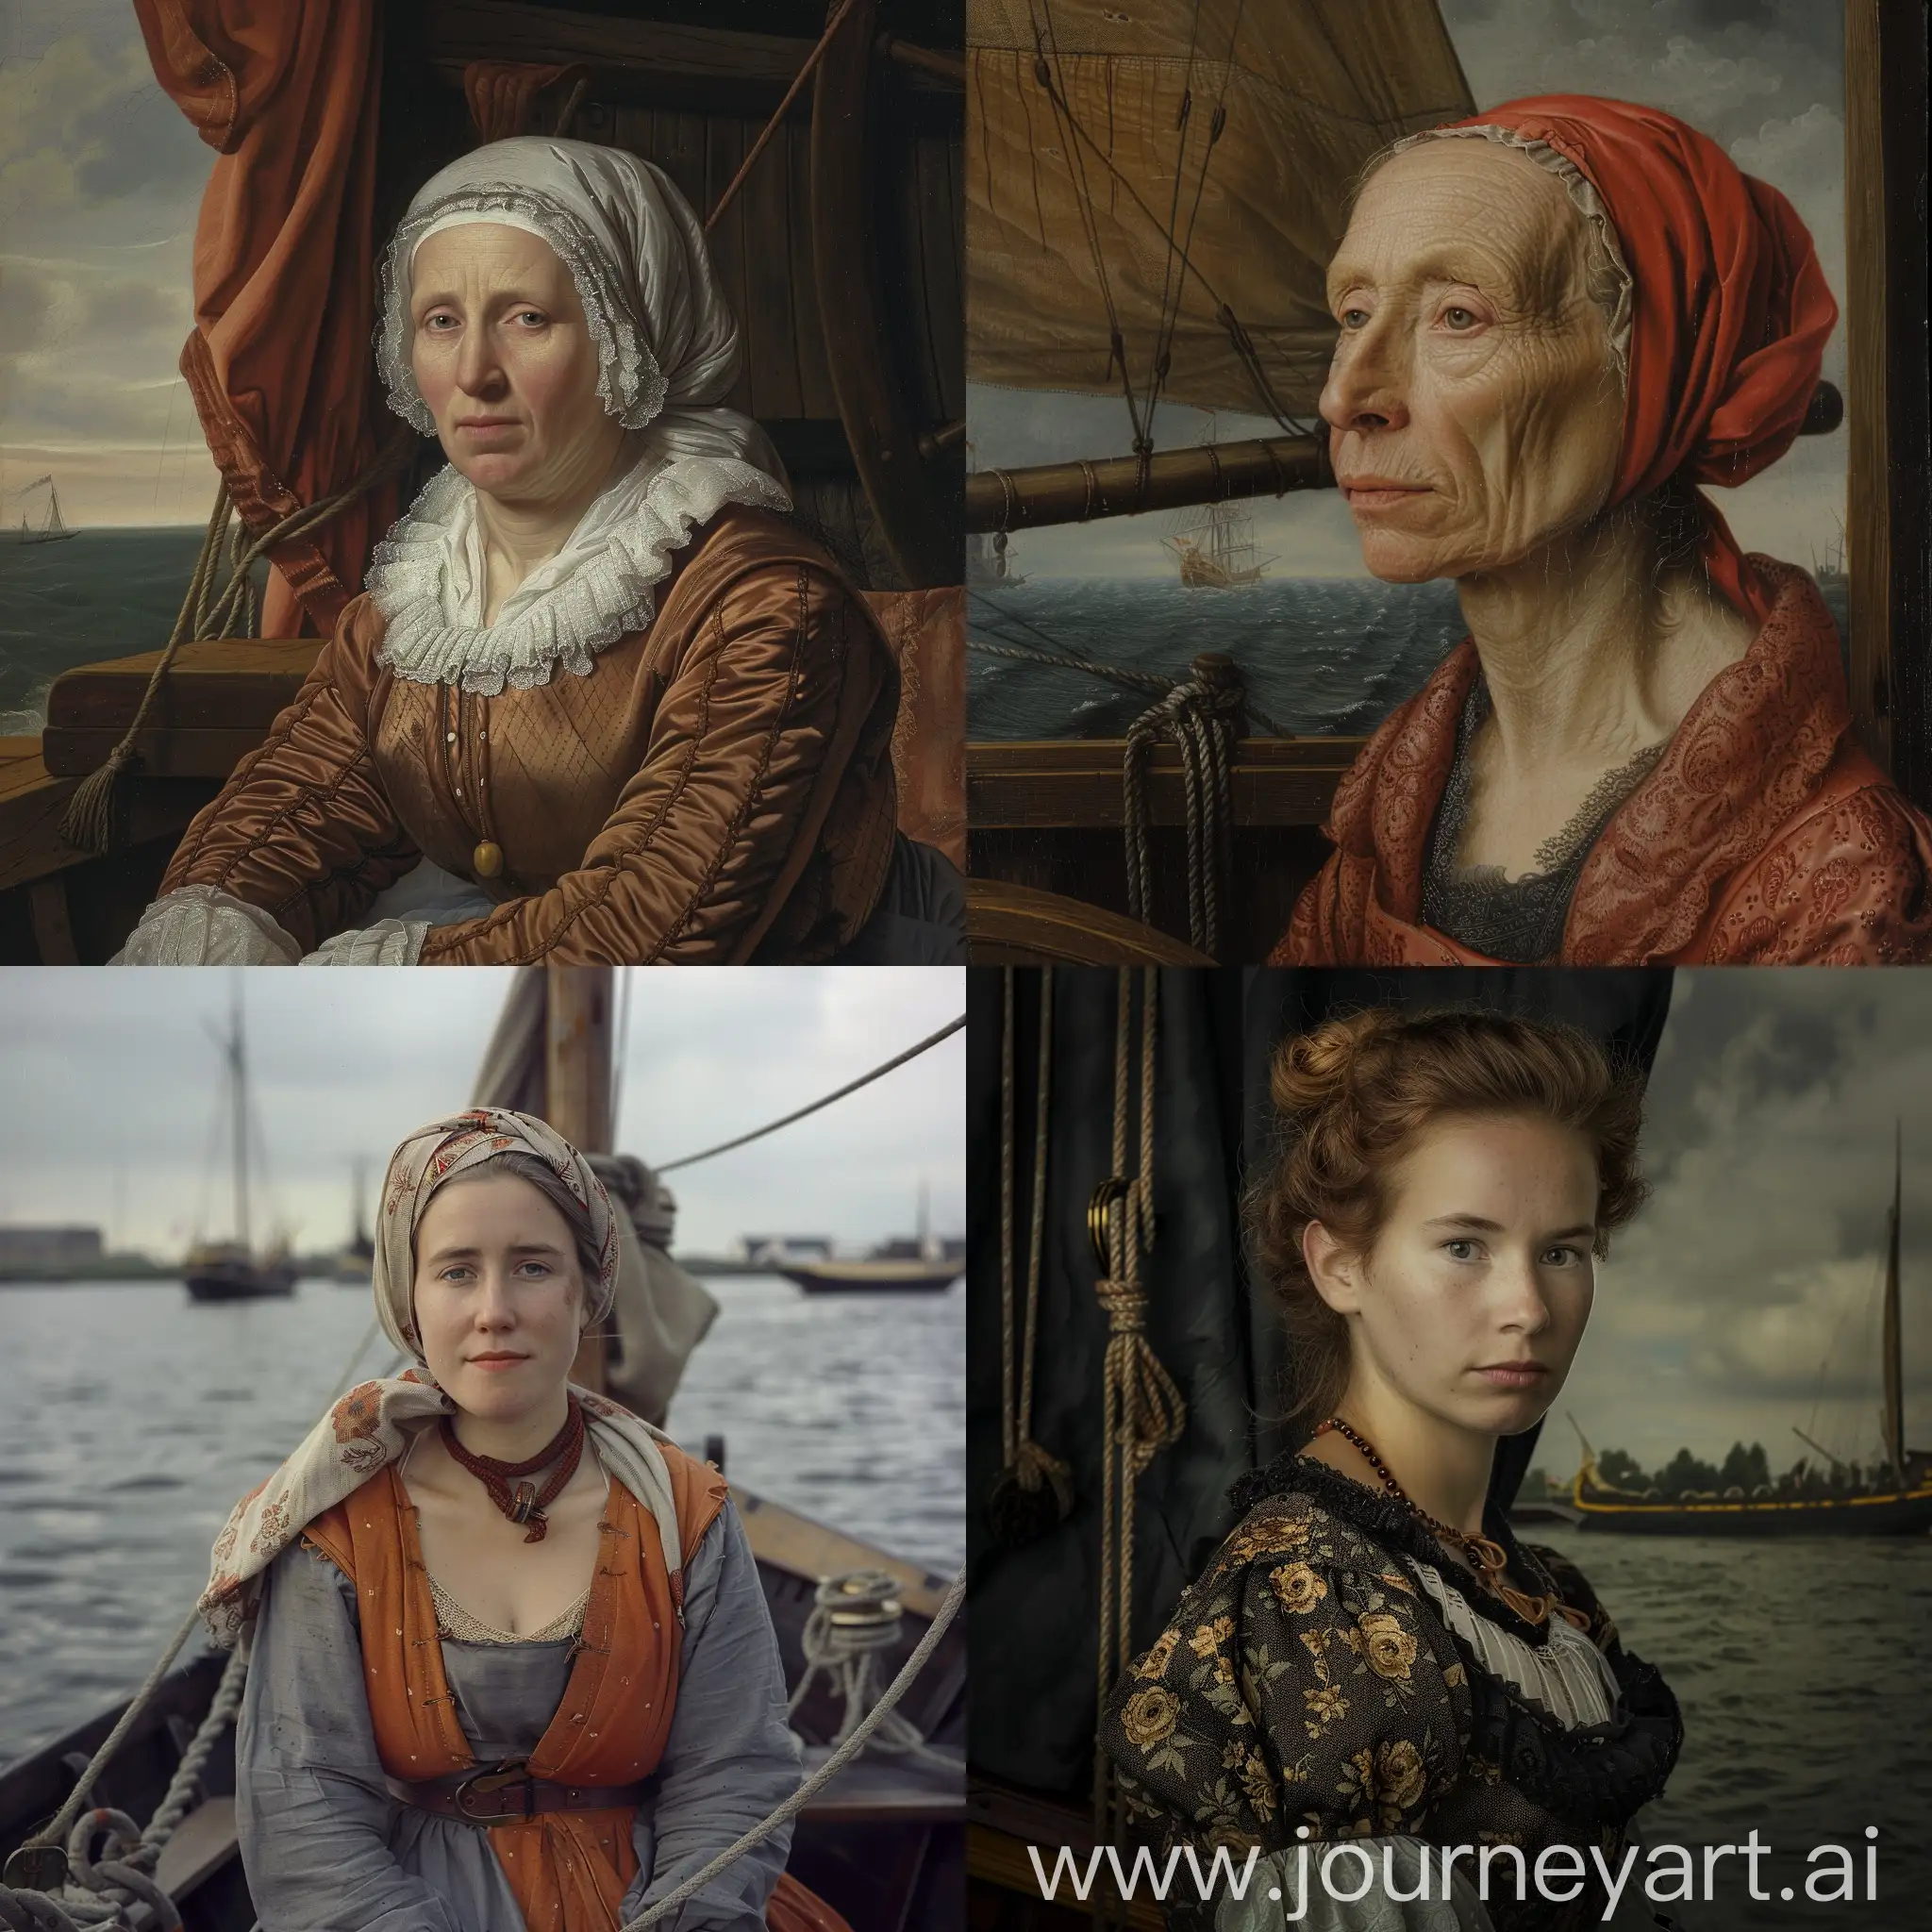 Young-Woman-in-Historical-Attire-on-Boat